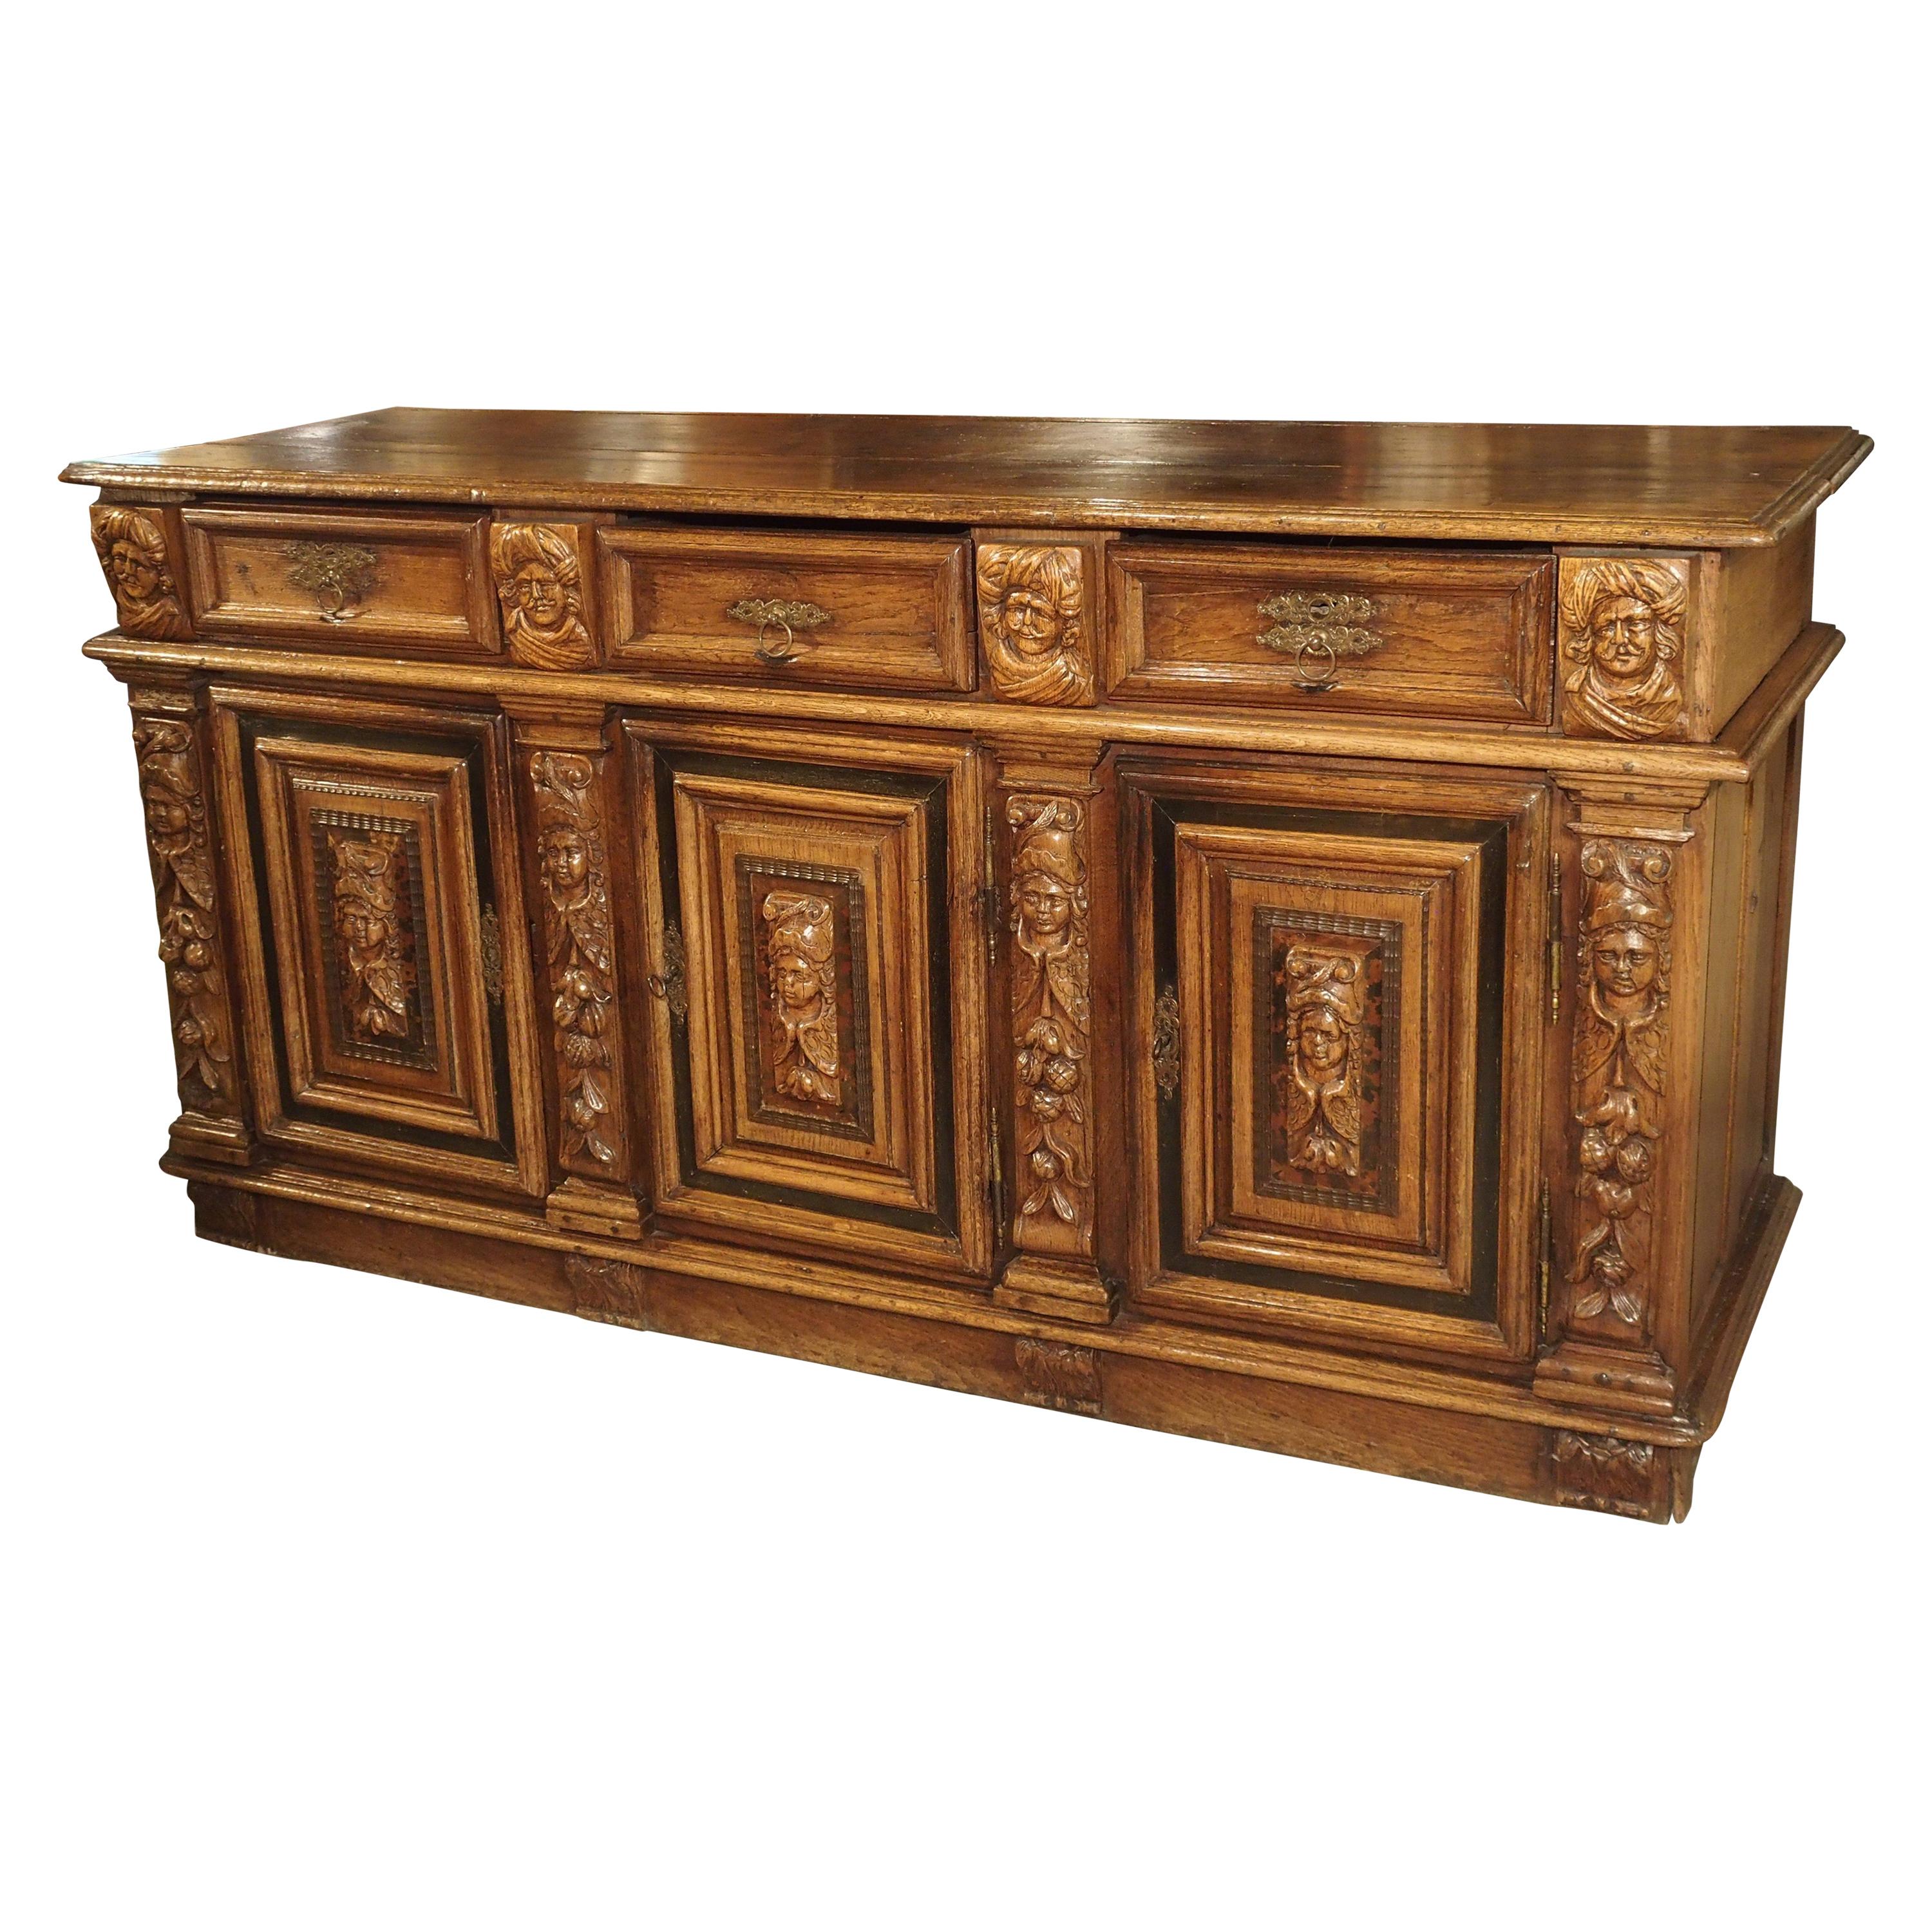 Rare 17th Century Oak Enfilade with Tortoiseshell and Ebony Inlays For Sale